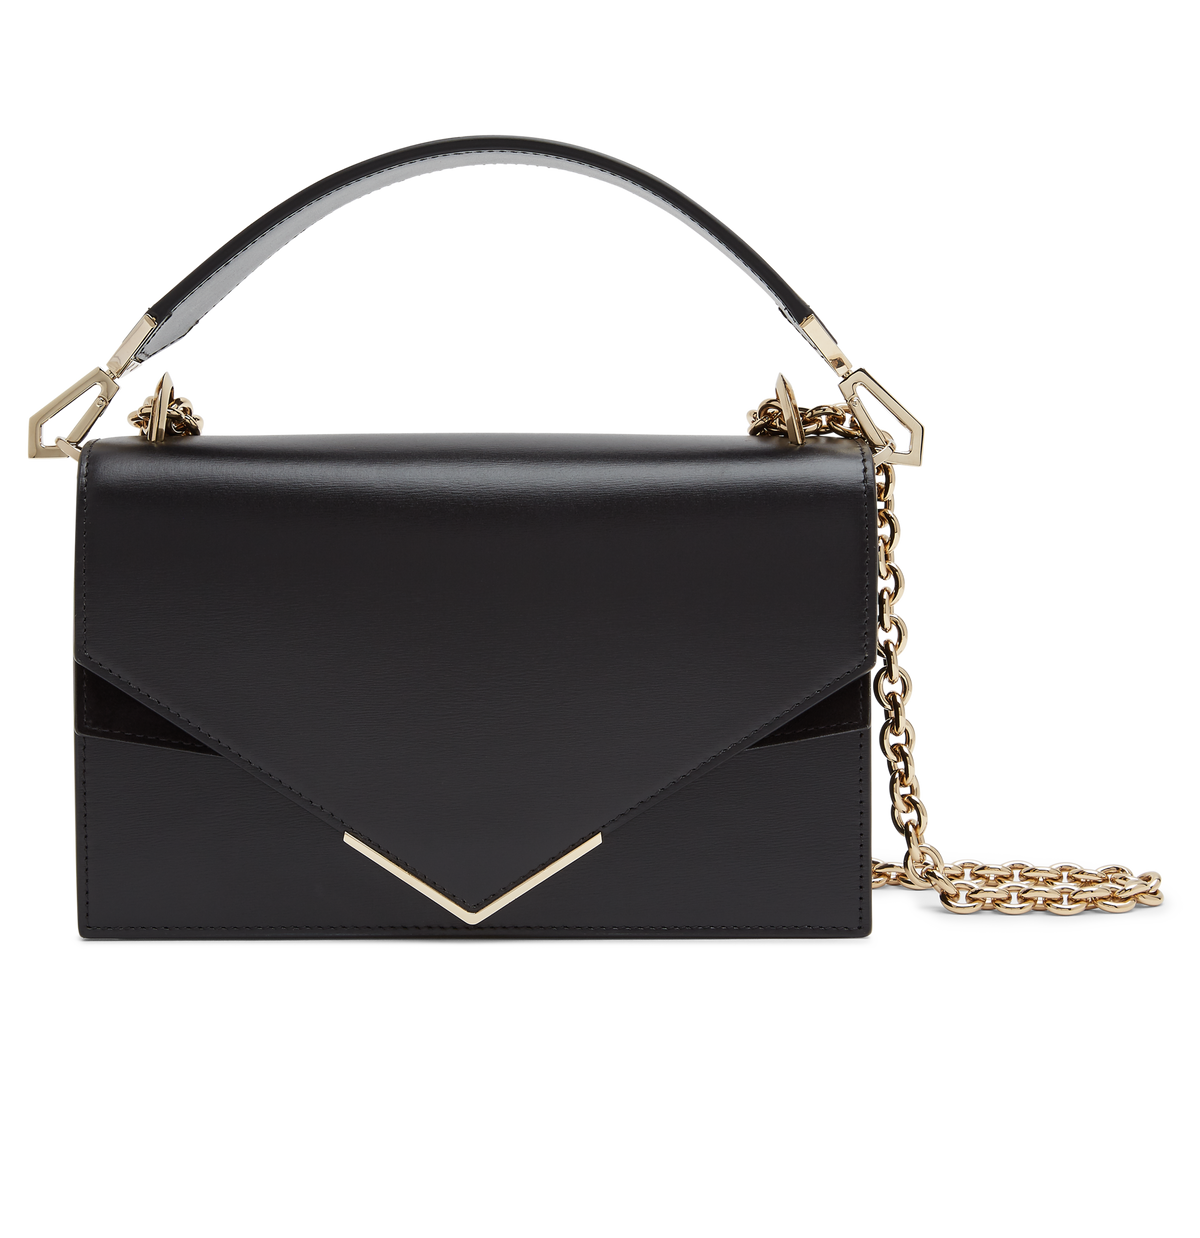 Black Calf Leather and Suede with Rose Gold Hardware